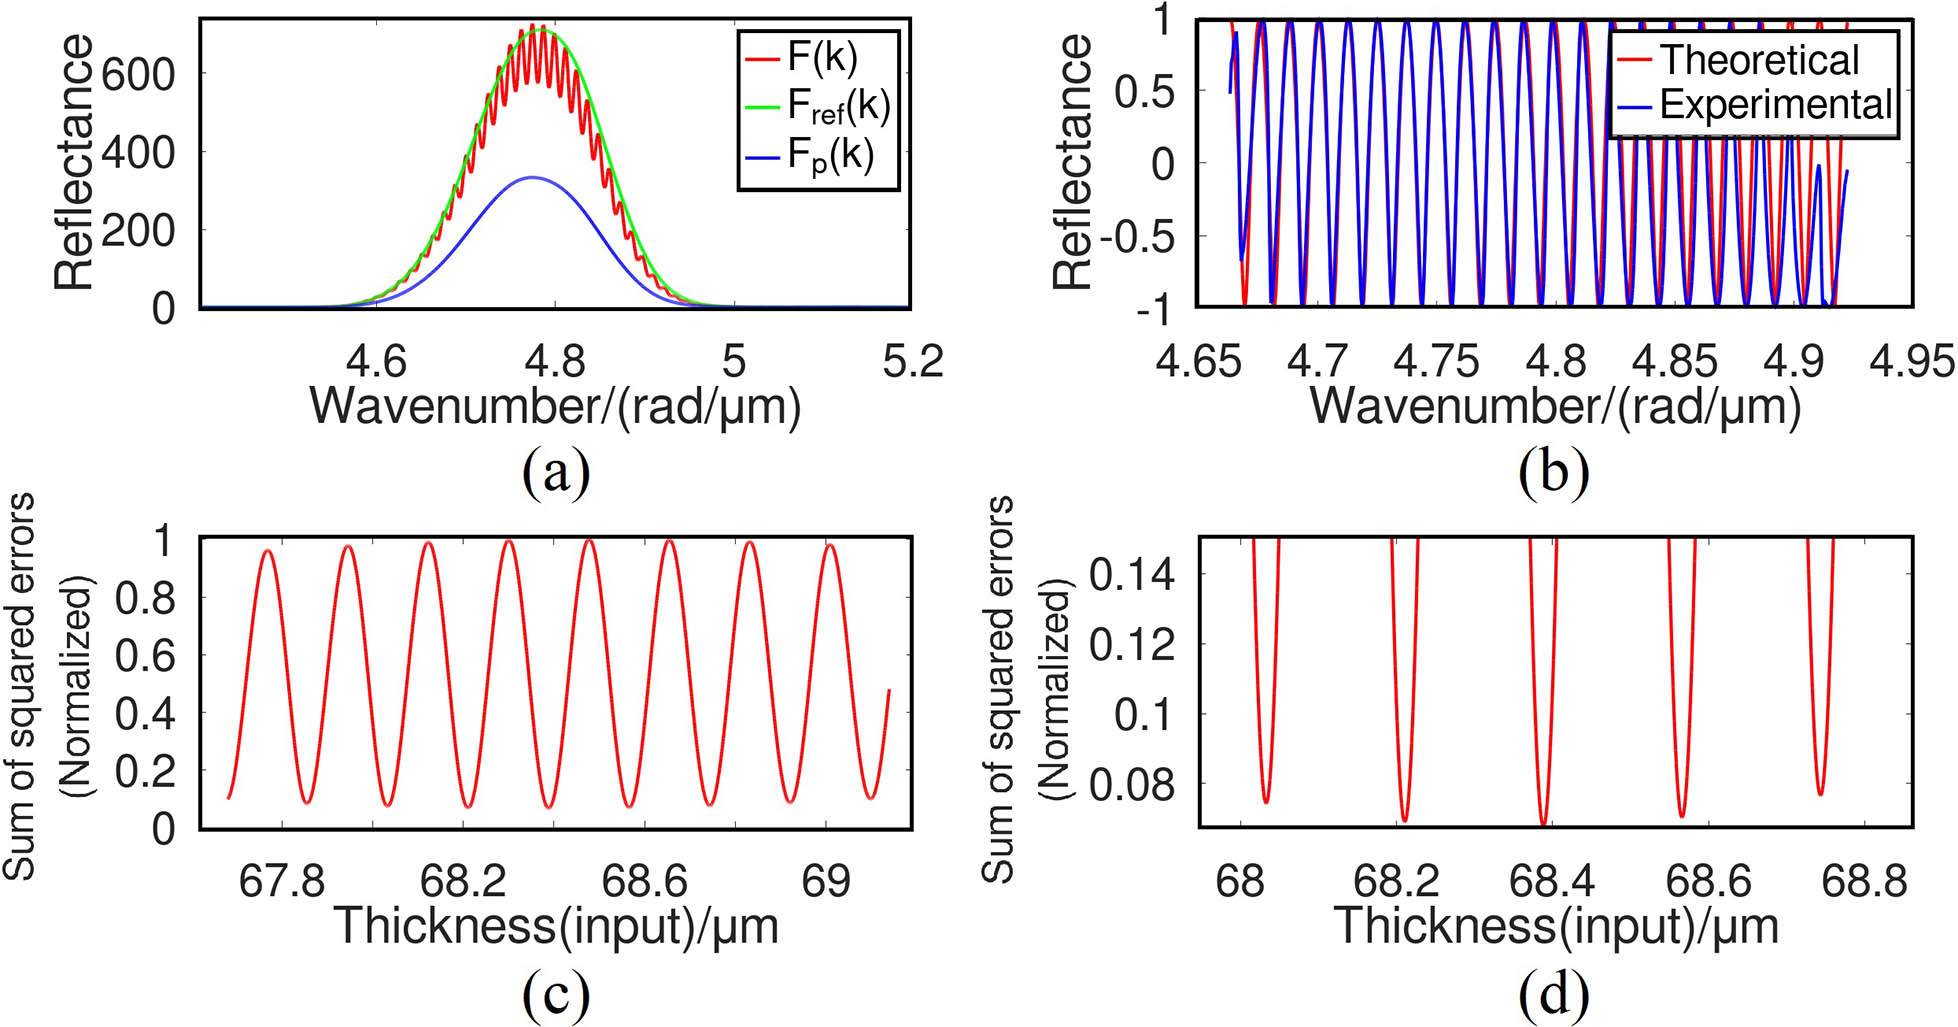 Experimental results for a single measurement of 68 µm Si film. (a) Reflectance spectrum F(k), Fref(k), and Fp(k). (b) Comparison of measured reflectance R(k) and theoretical model. (c) Normalized sum of squared errors for reflectance fitting between the experimental result and theoretical model at different values of input thickness. (d) Detailed view of (c) showing the minimum sum of squared errors.